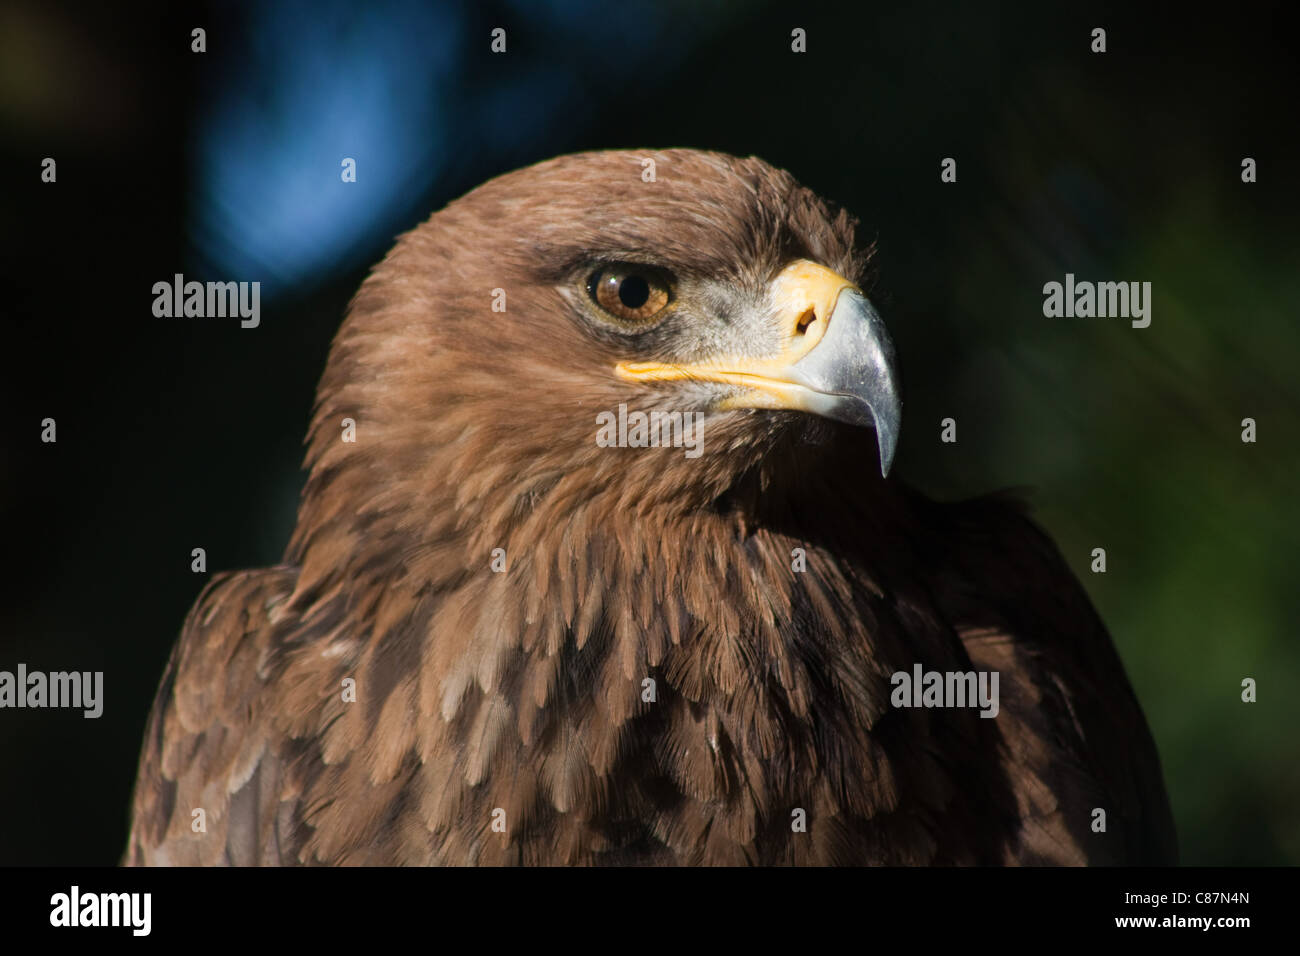 The Tawny Eagle (Aquila rapax) is a large bird of prey. It belongs to the family Accipitridae. Stock Photo